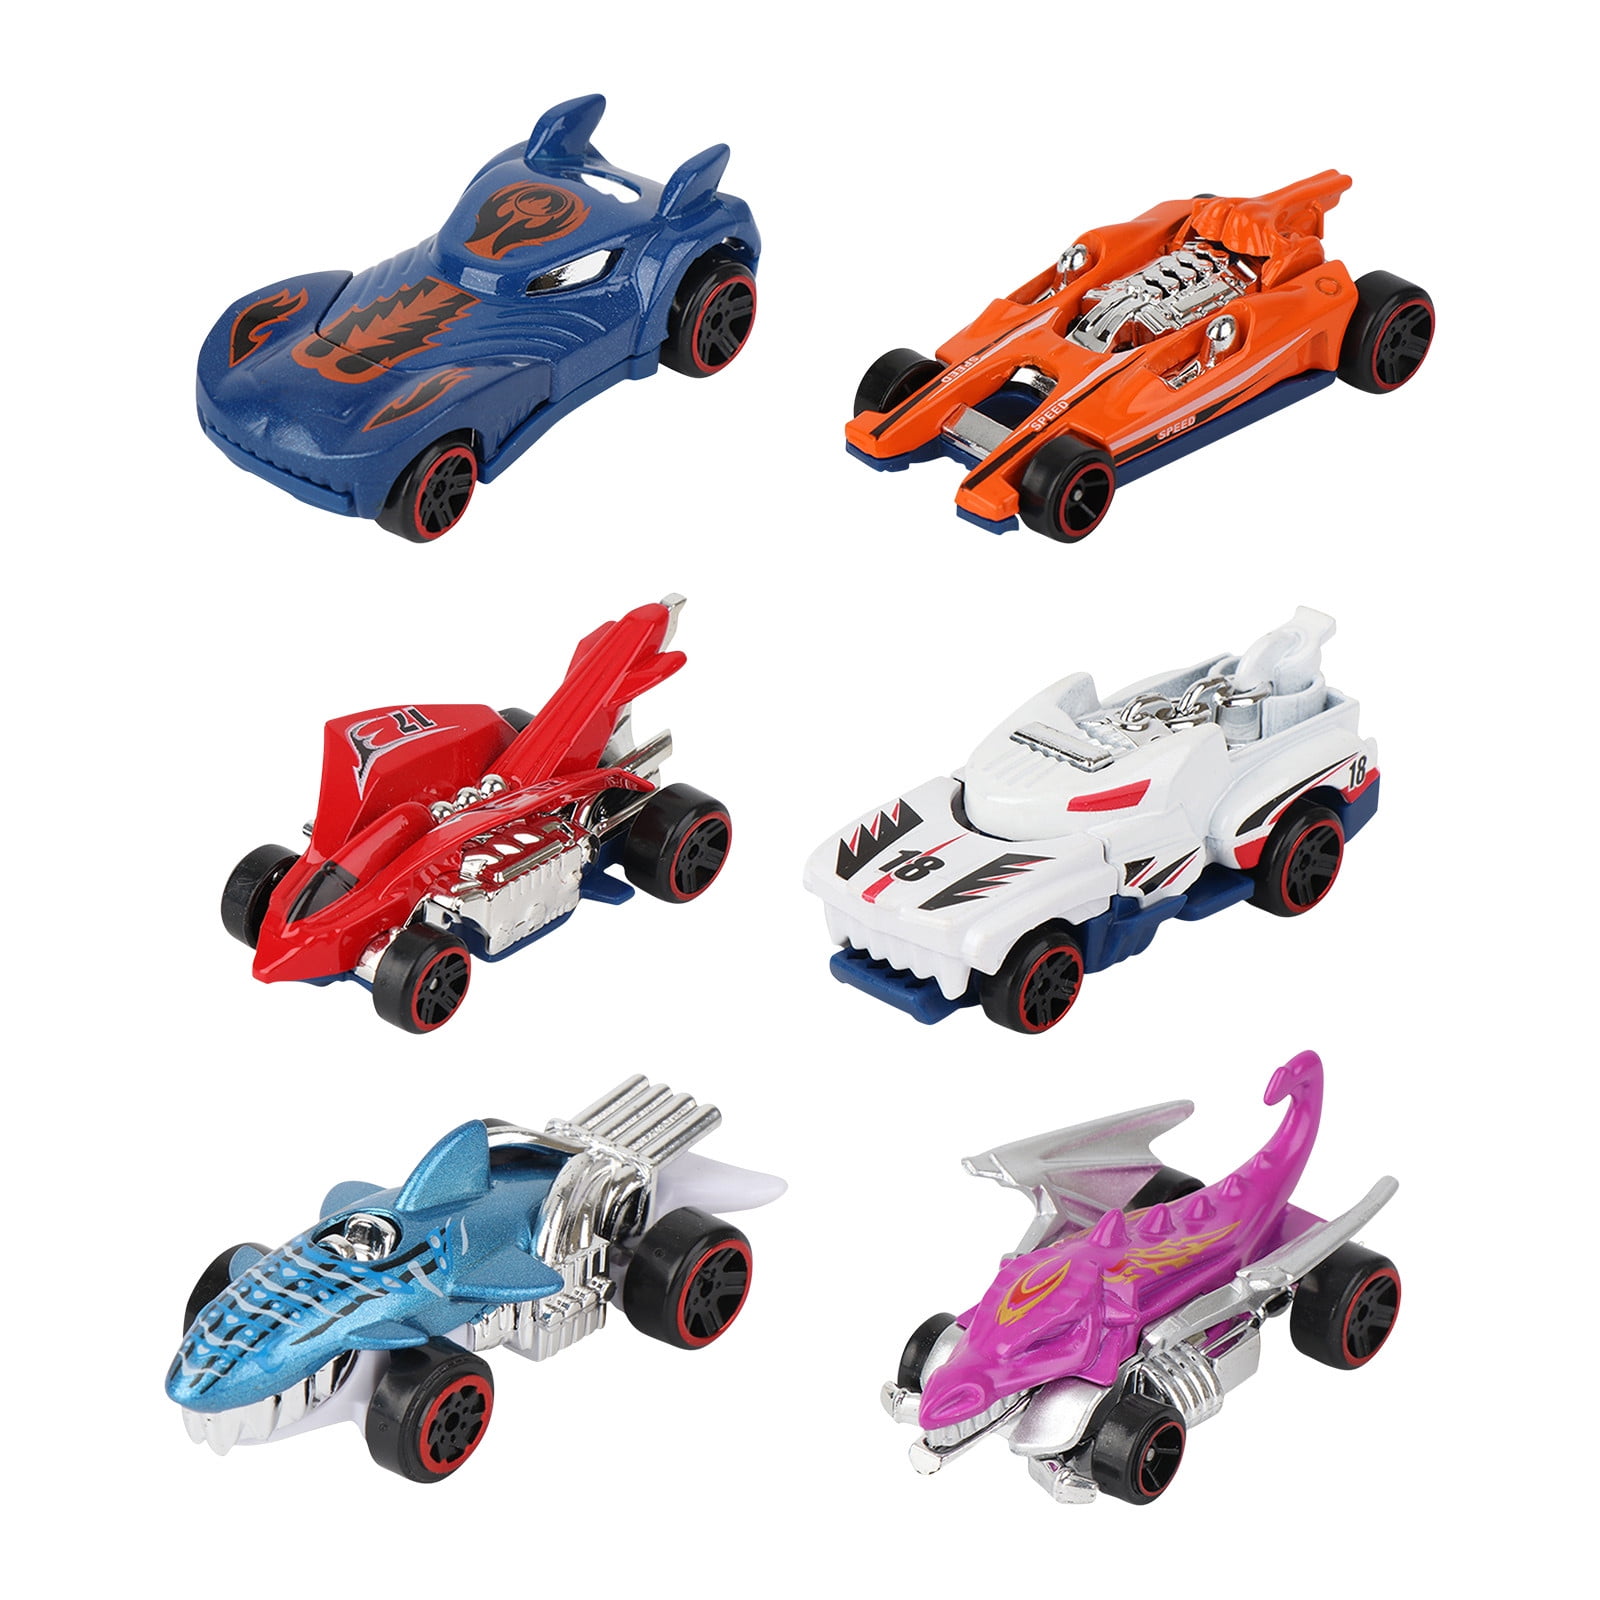 2pcs Mini Alloy Scooter Car Models Toy Simulated Racing for Kid Boys toy Gifts S 